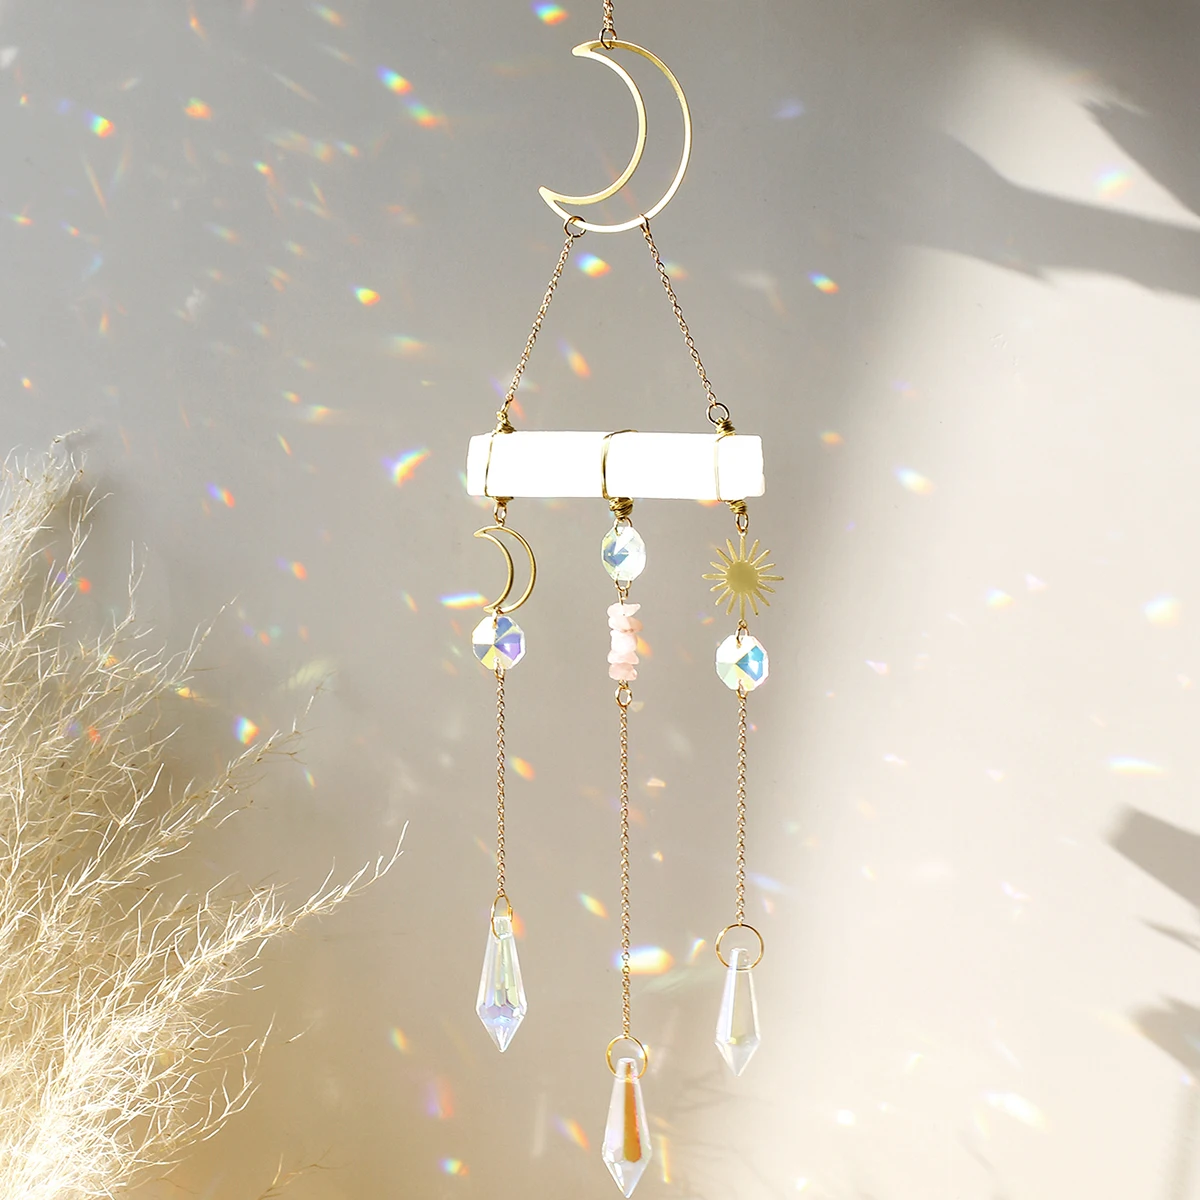 Crystal Chimes Moon Rainbow Prisms for Hanging Window Crystal Sun Catchers Garden Ornaments Selenite Healing Suncatcher Gifts